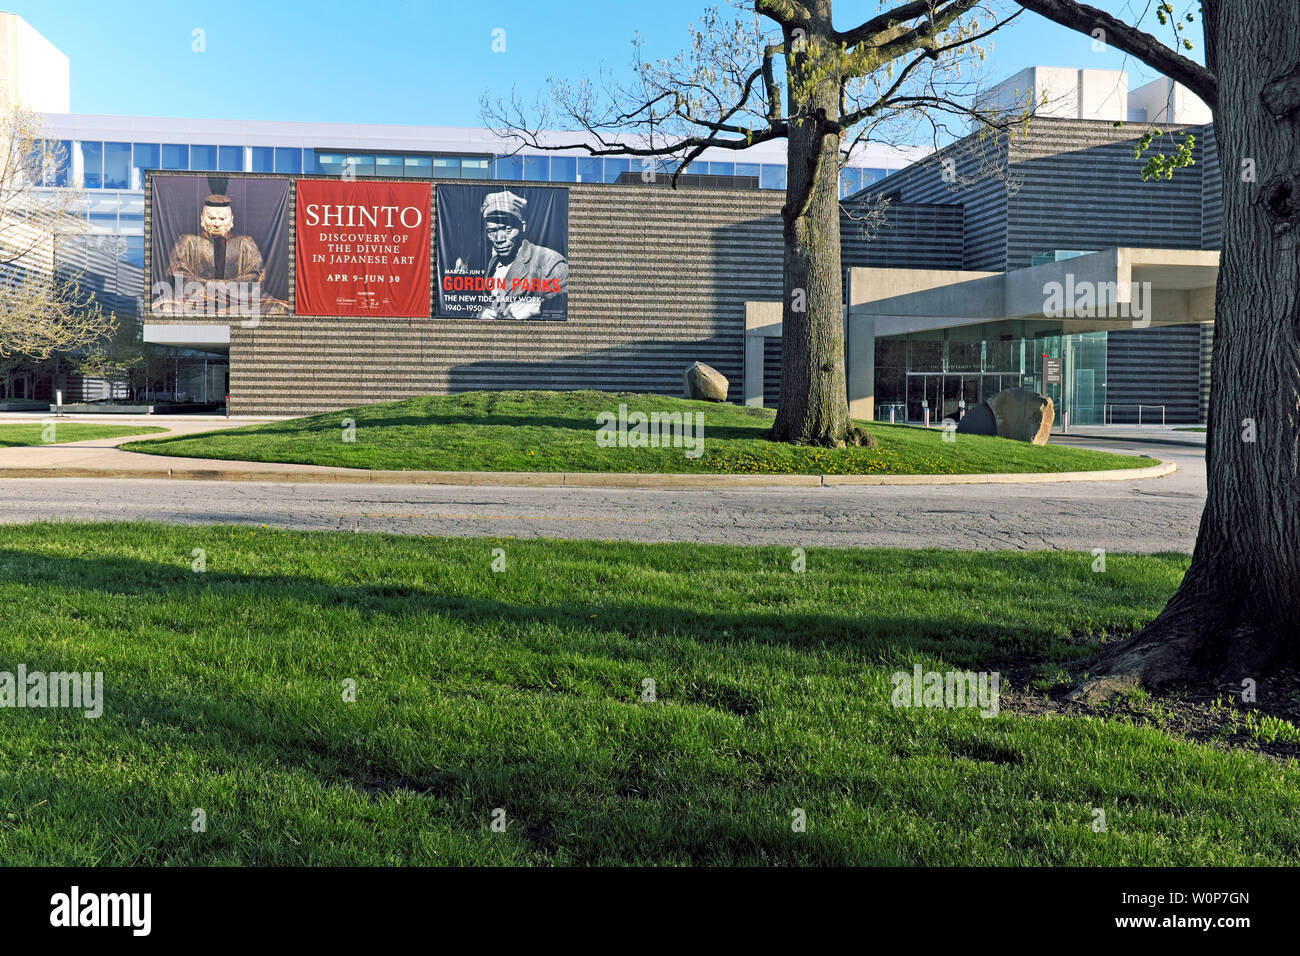 Das Cleveland Museum of Art im Wade Park District in Cleveland, Ohio, USA. Stockfoto